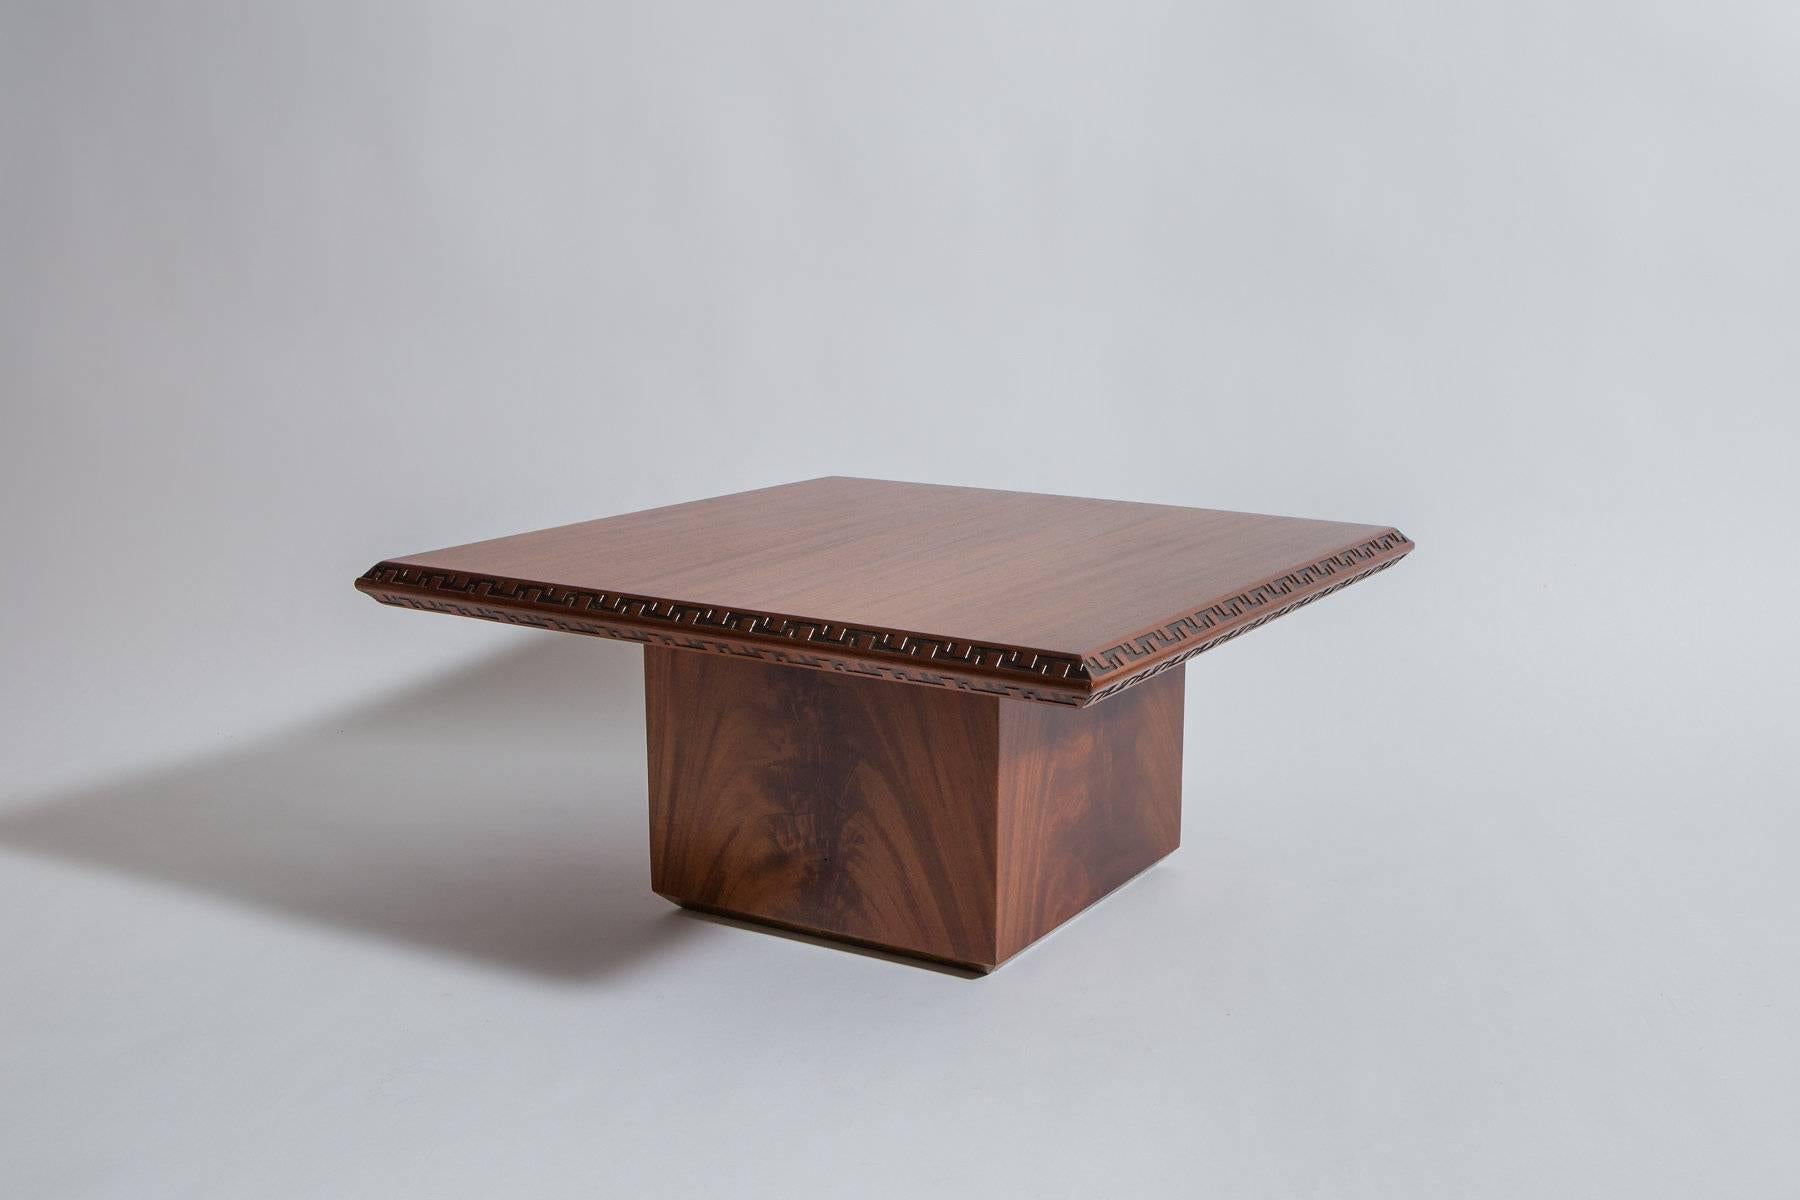 Mahogany side table designed by Frank Lloyd Wright and manufactured by Heritage Henredon Furniture. Taliesin edging to perimeter. Pair of sofas from this collection also available separately.